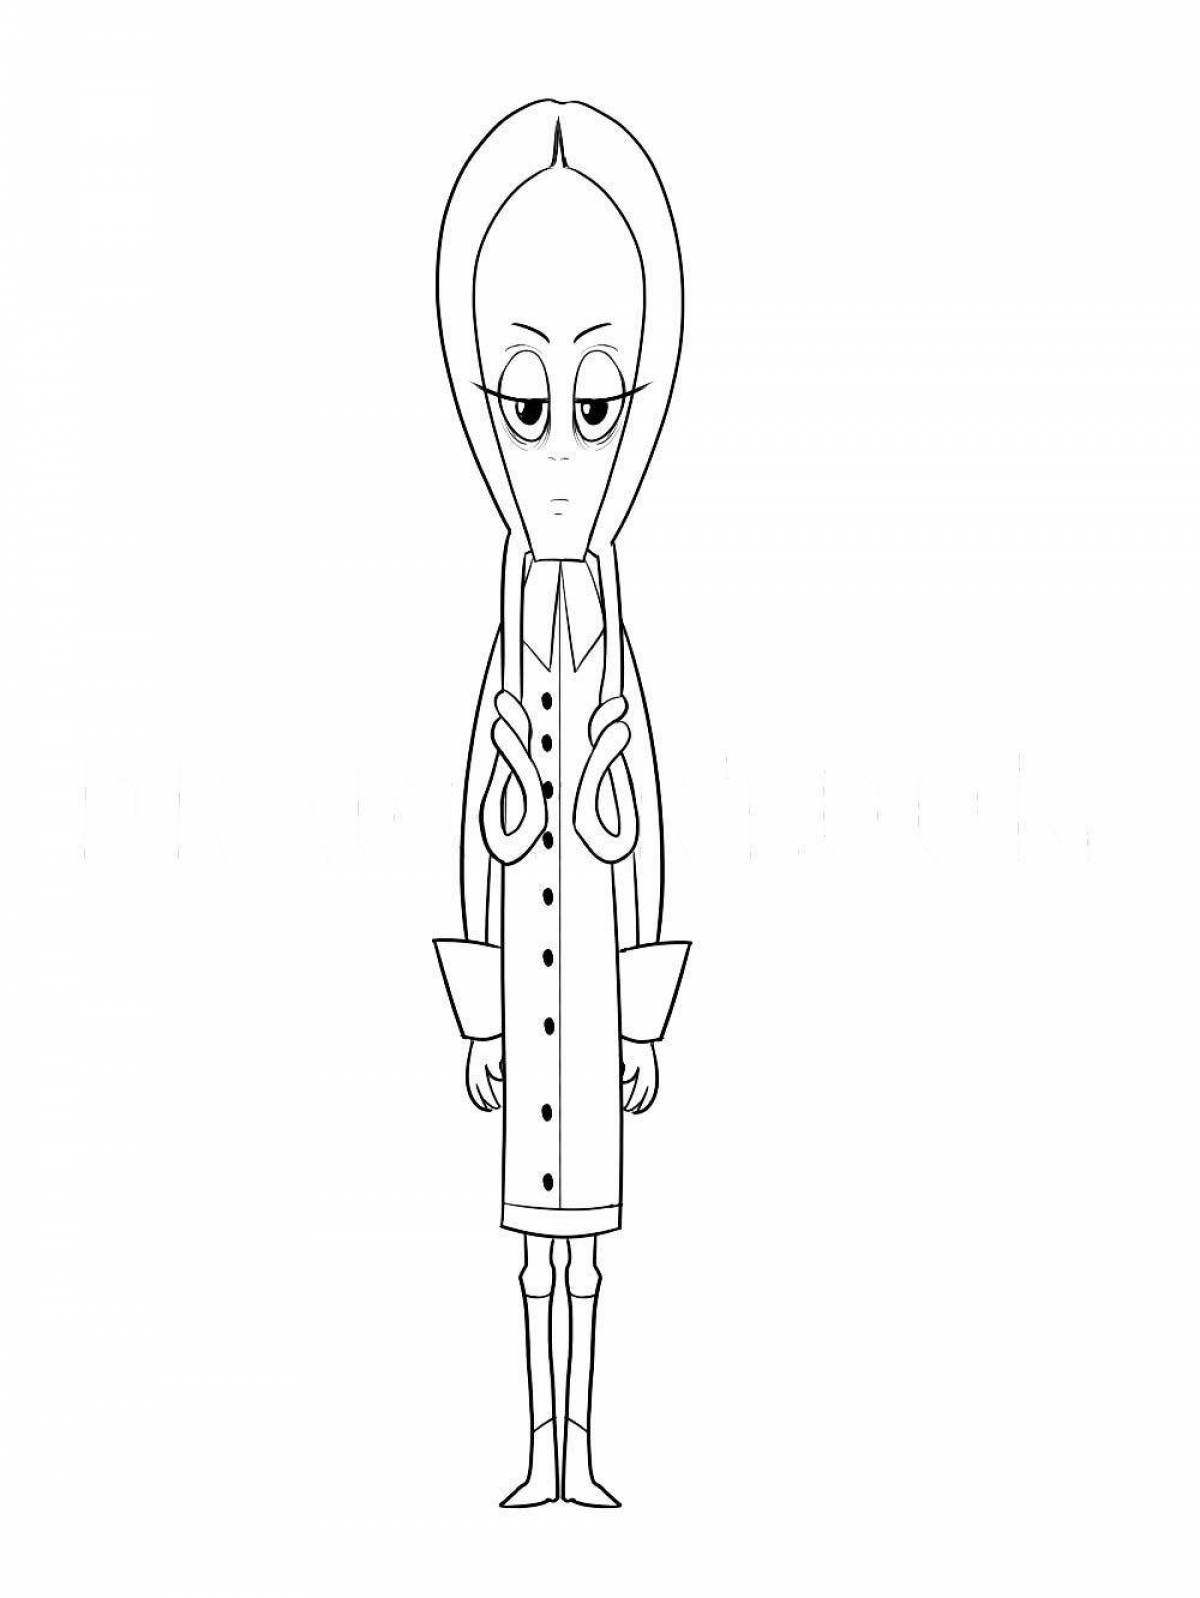 Addams fun wednesday coloring page